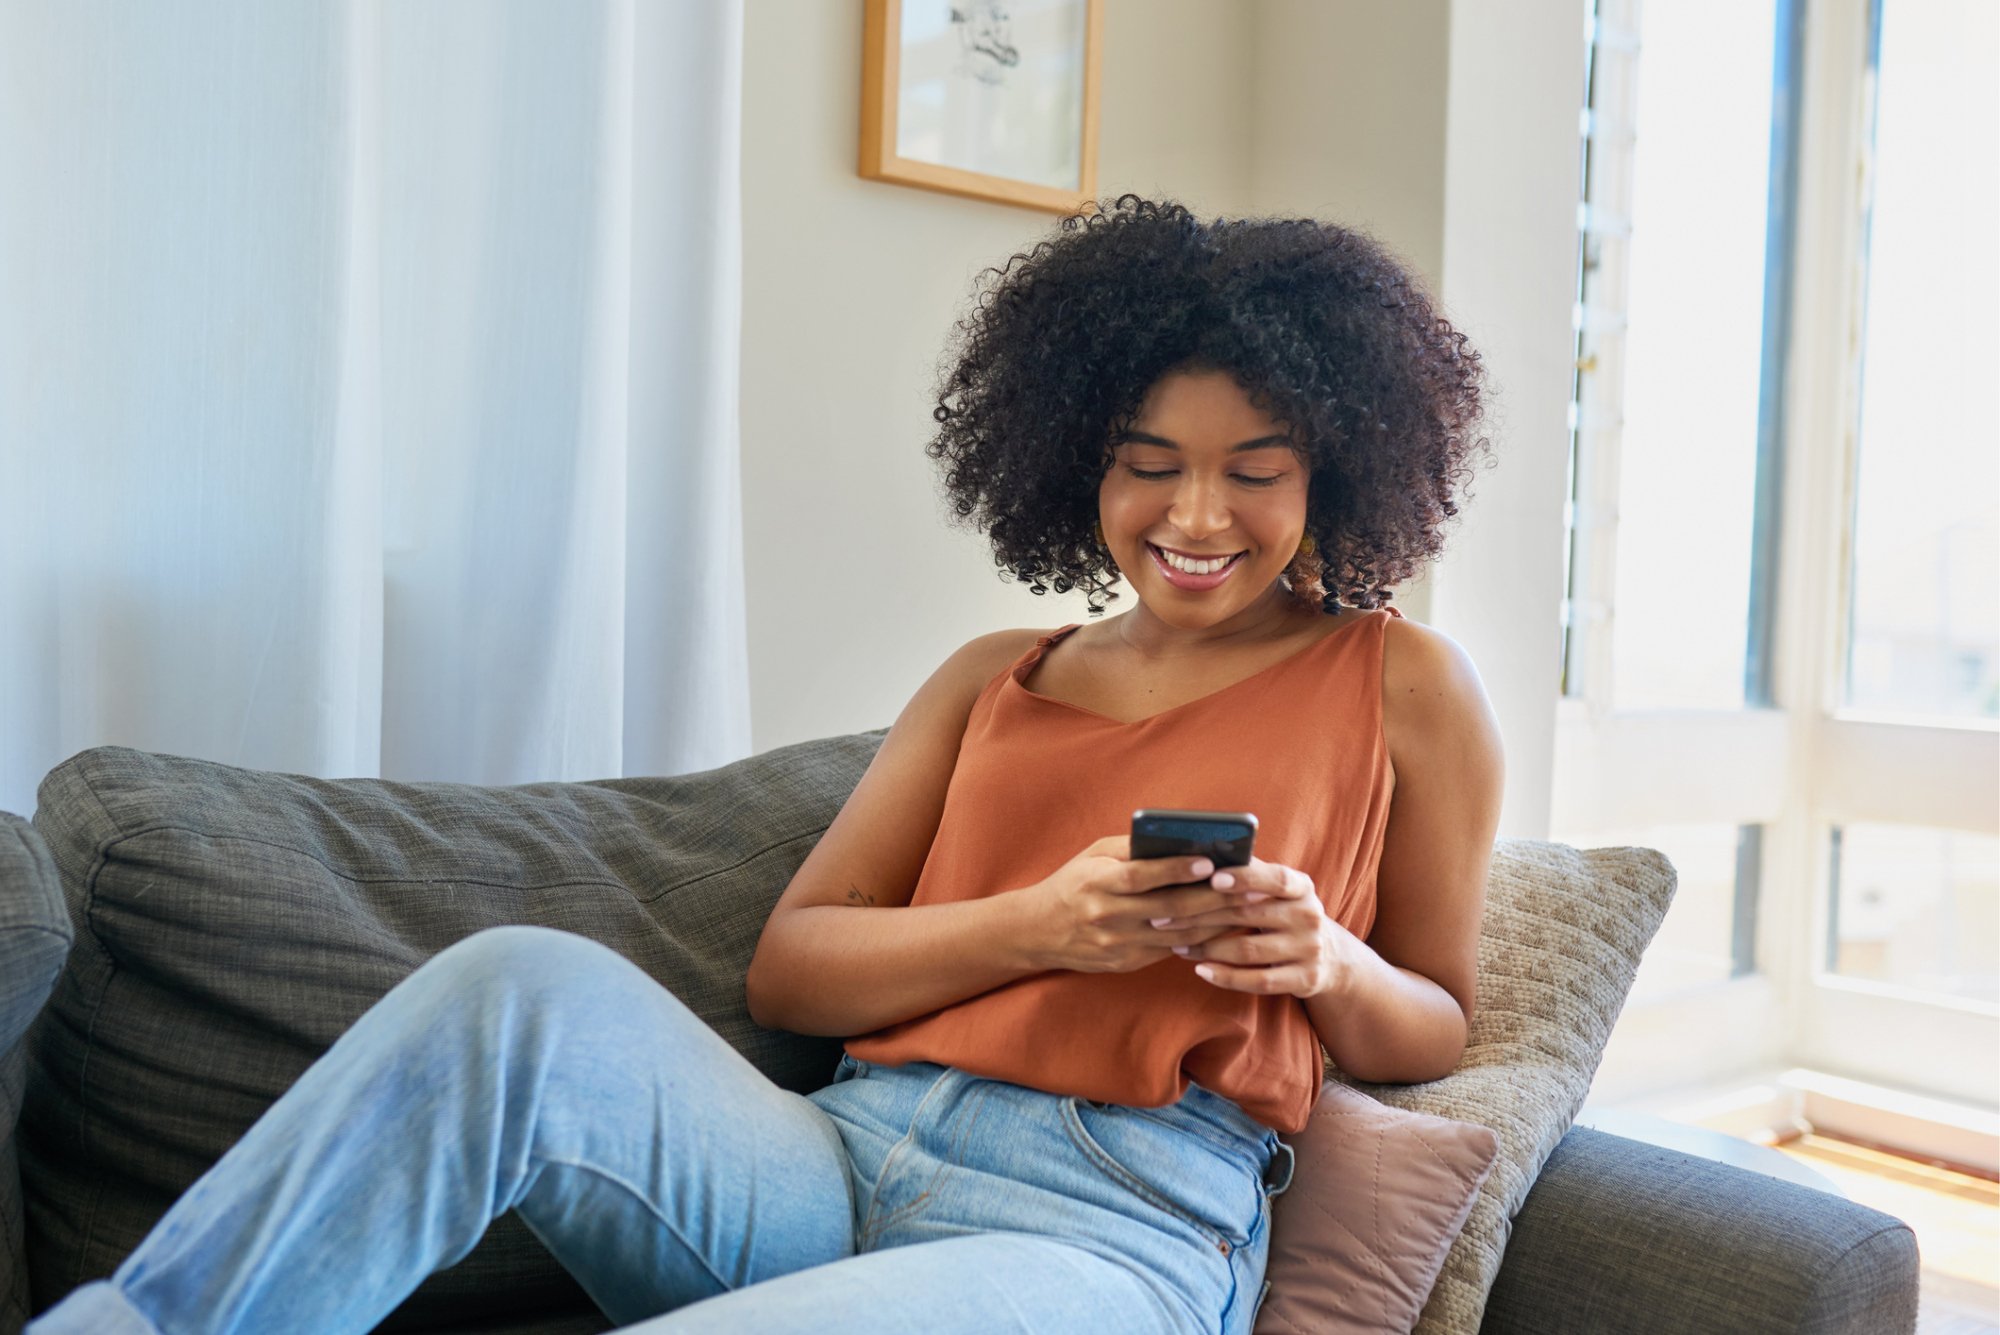 Woman on couch looking at phone